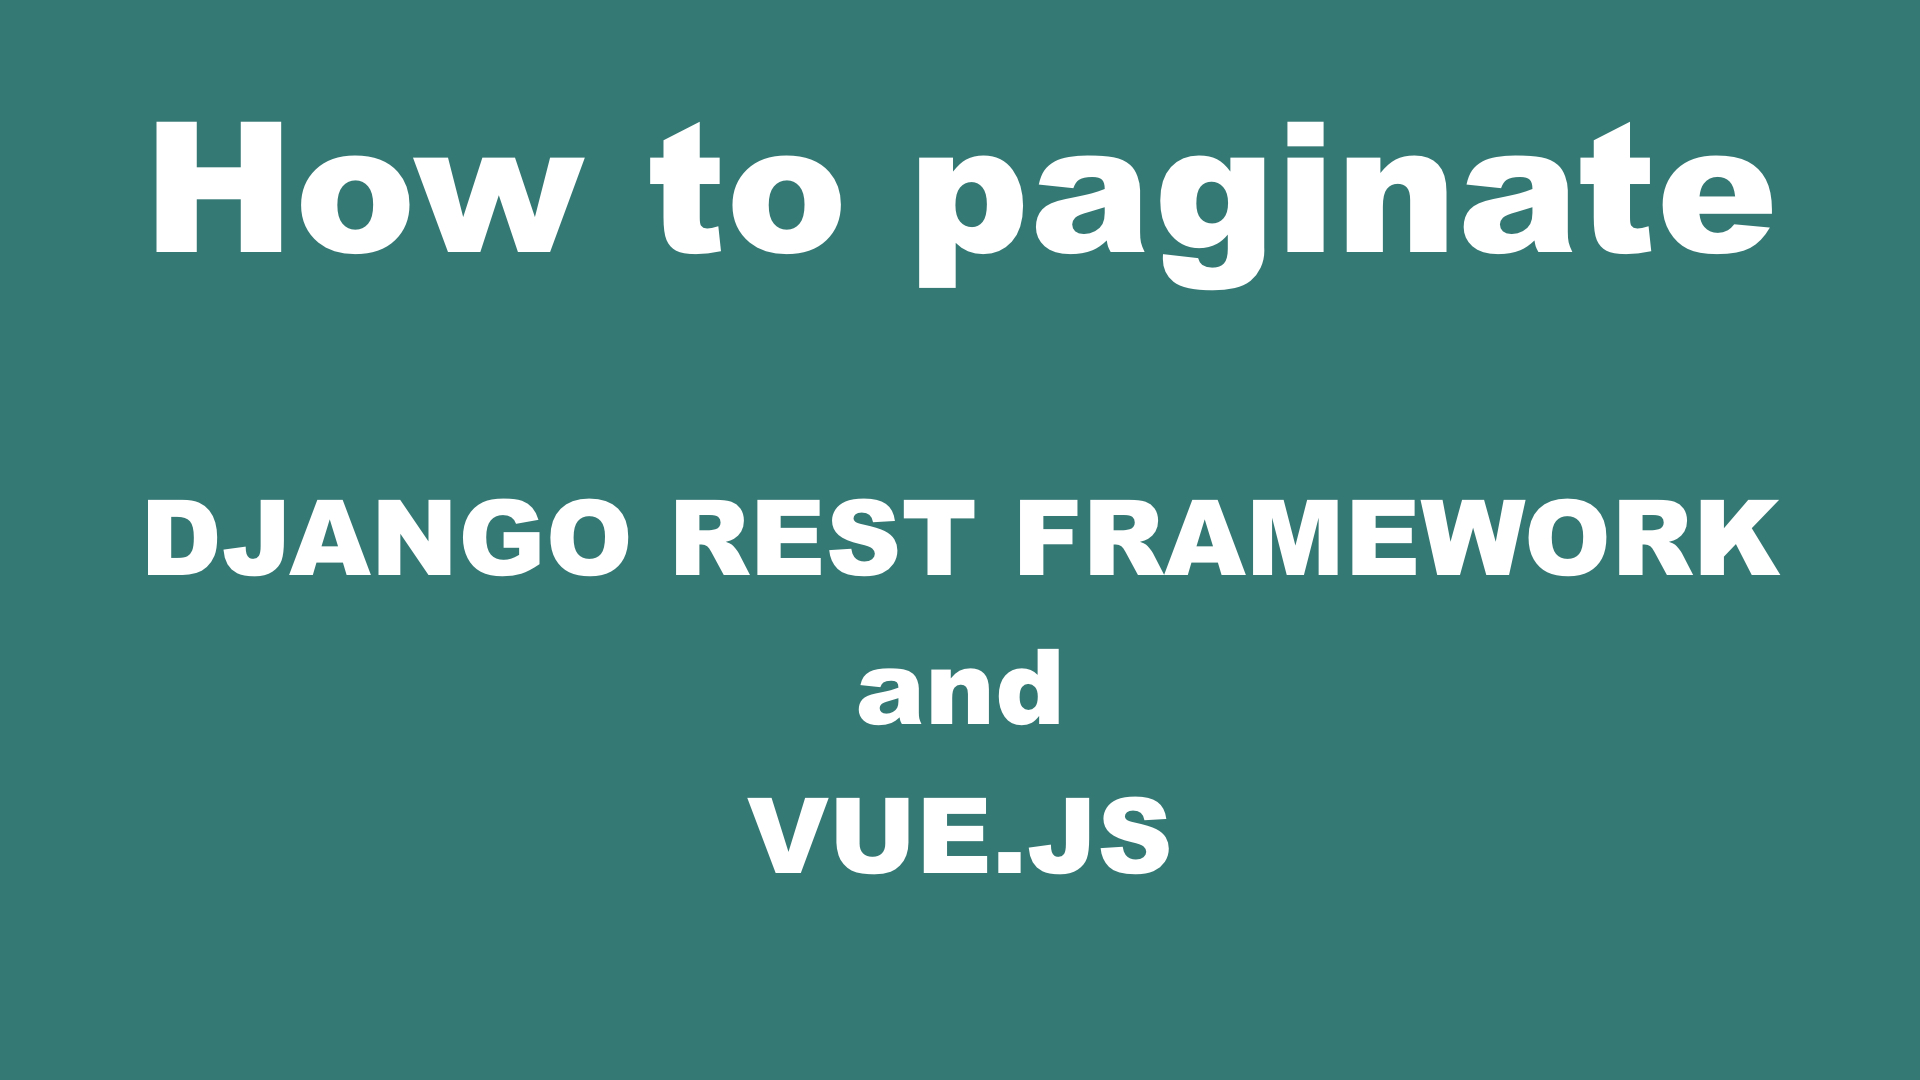 How To Paginate With Django Rest Framework And Vue